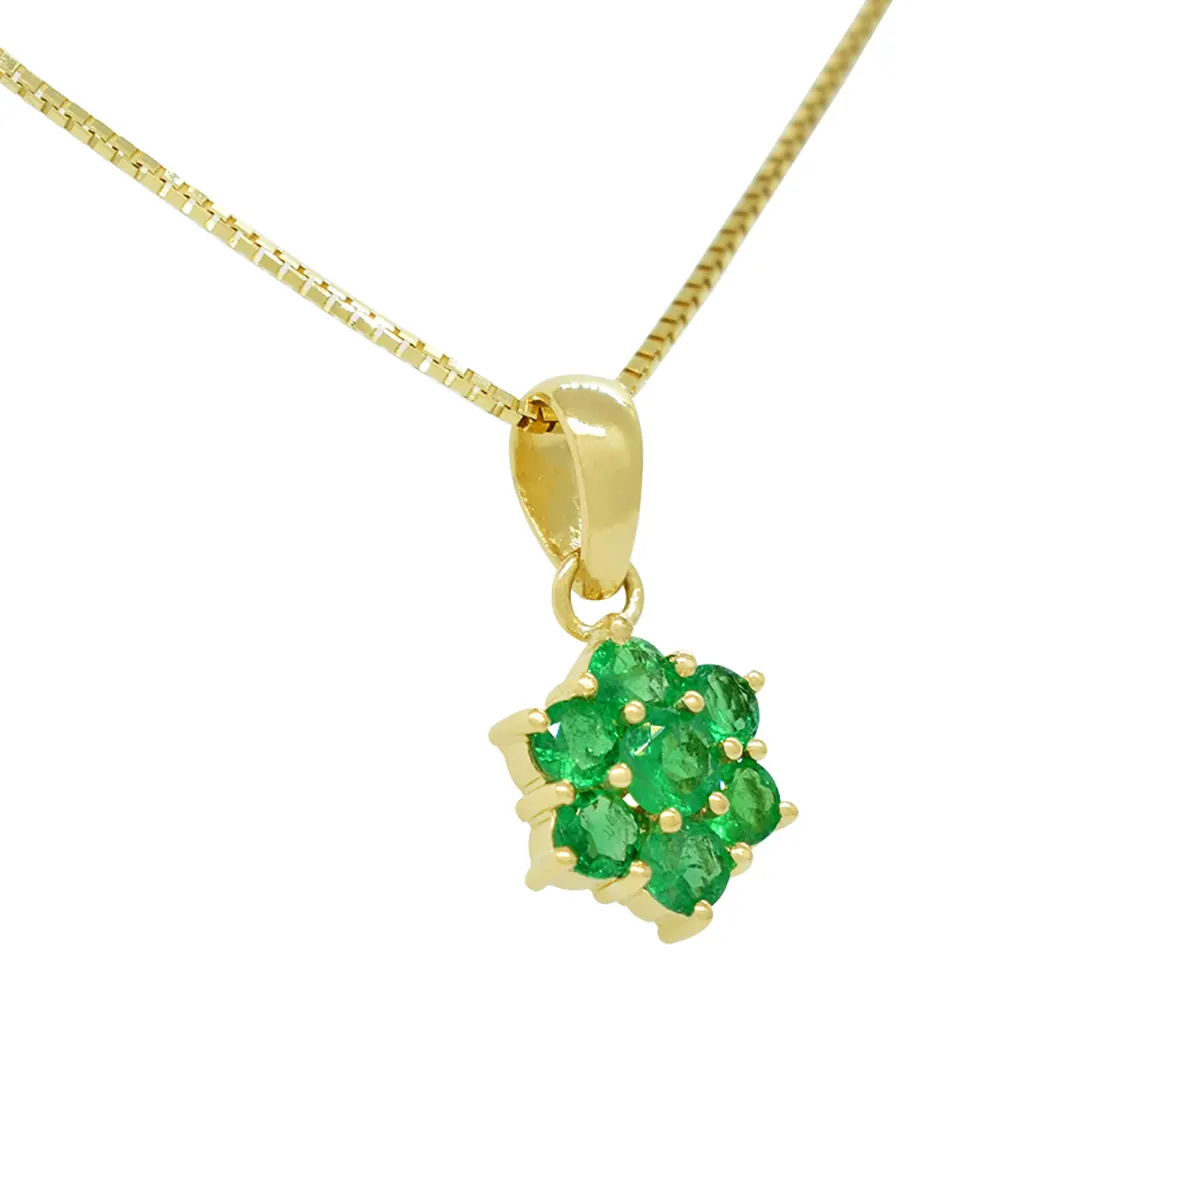 Flower Design Emerald Pendant in 18K Yellow Gold With 7 Round Emeralds